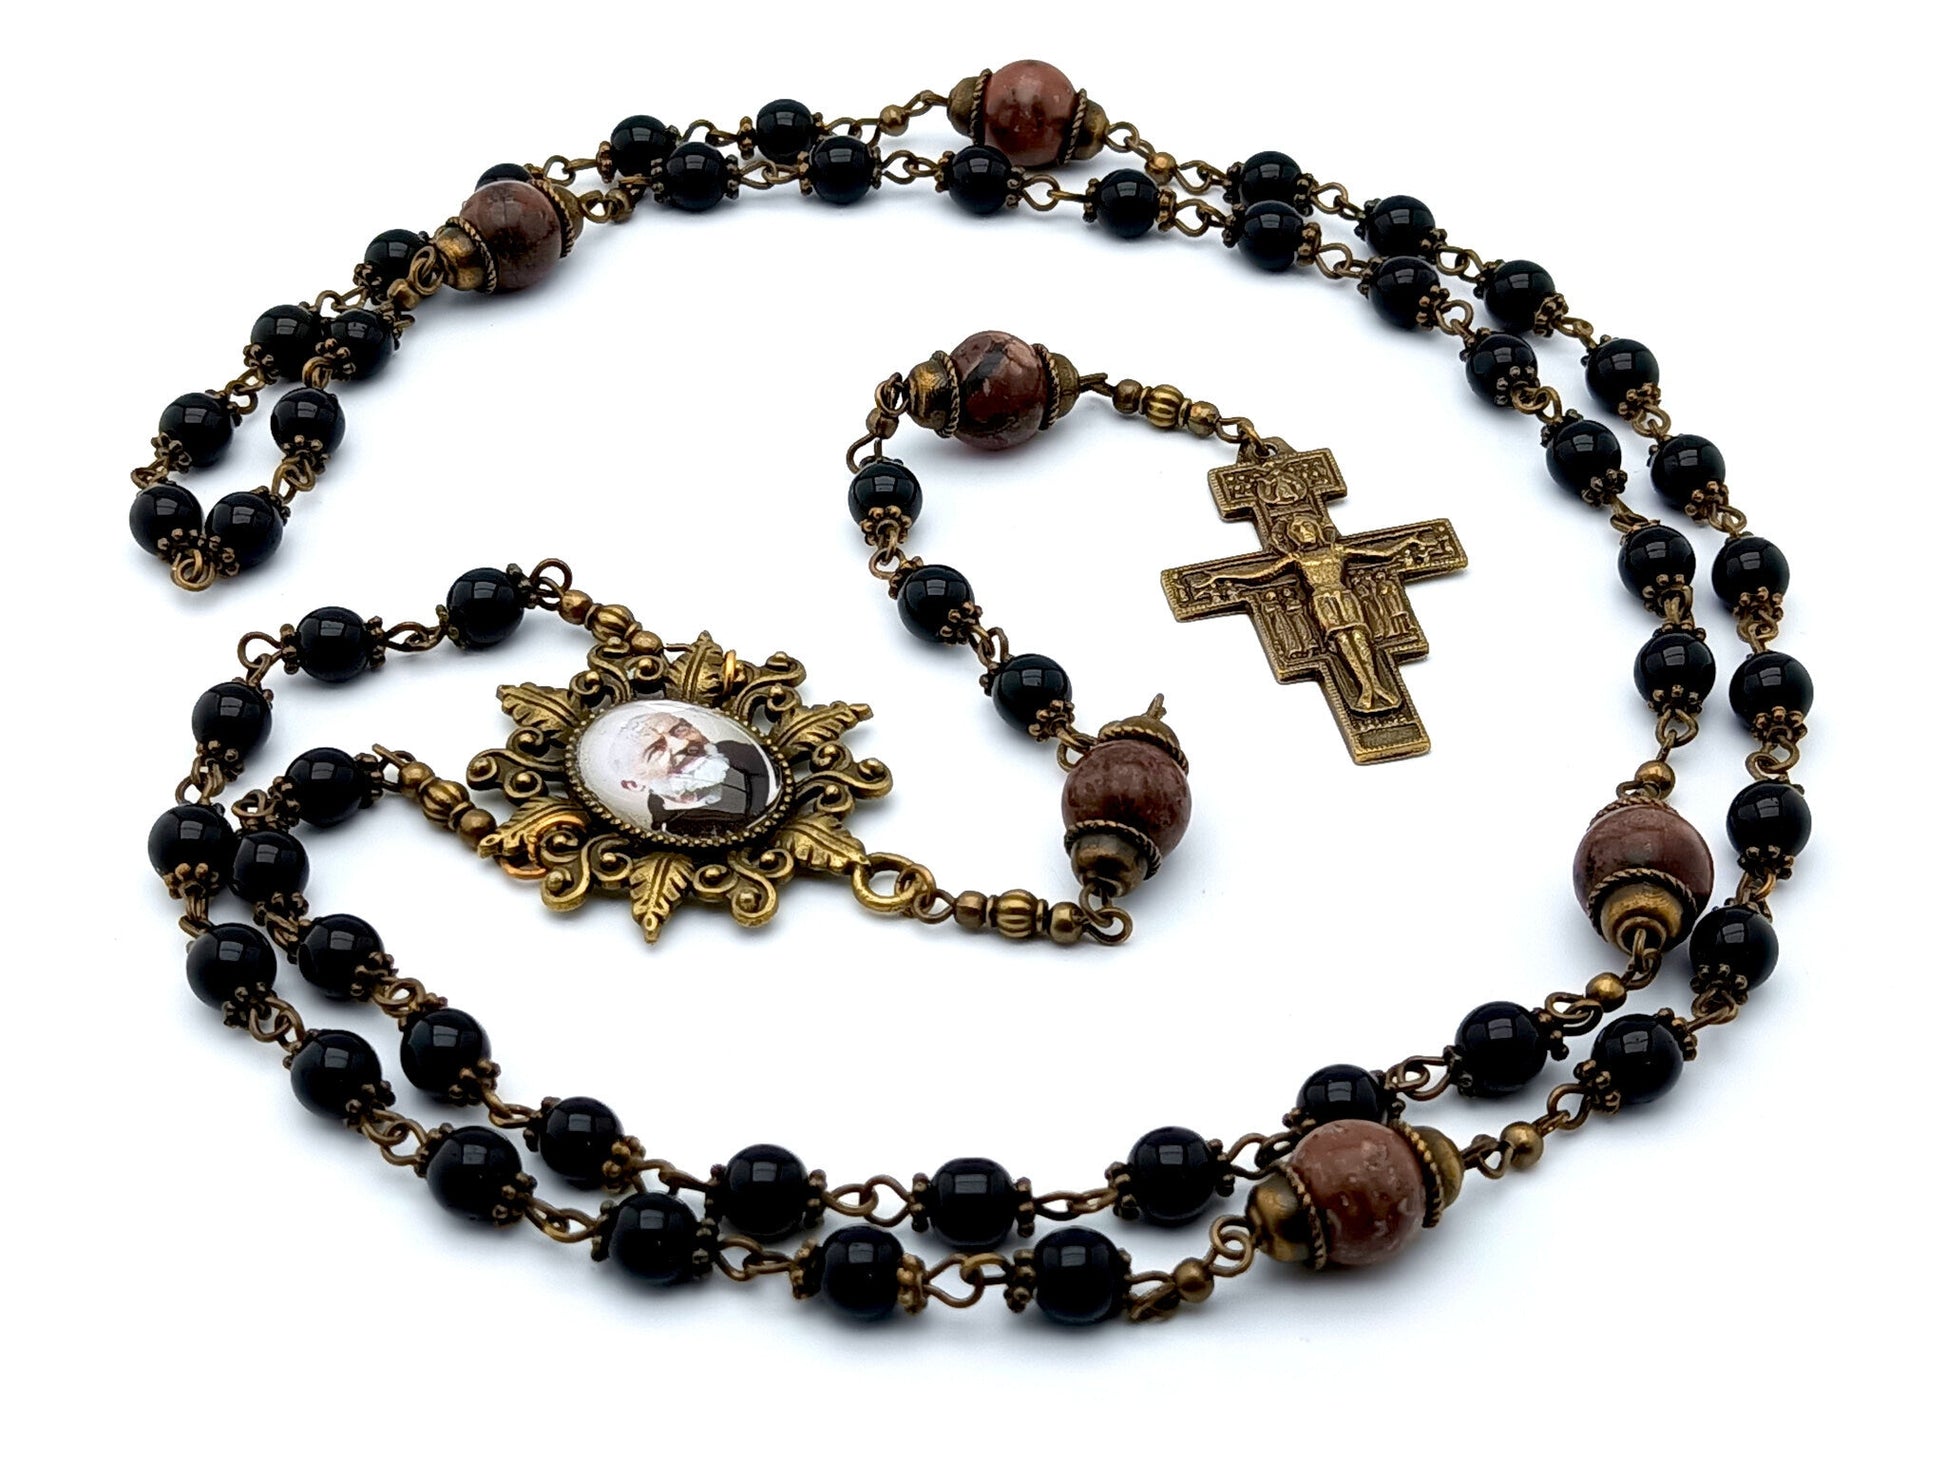 Saint Padre Pio unique rosary beads with black glass and gemstone beads, bronze Saint Francis crucifix, picture centre medal and accessories.